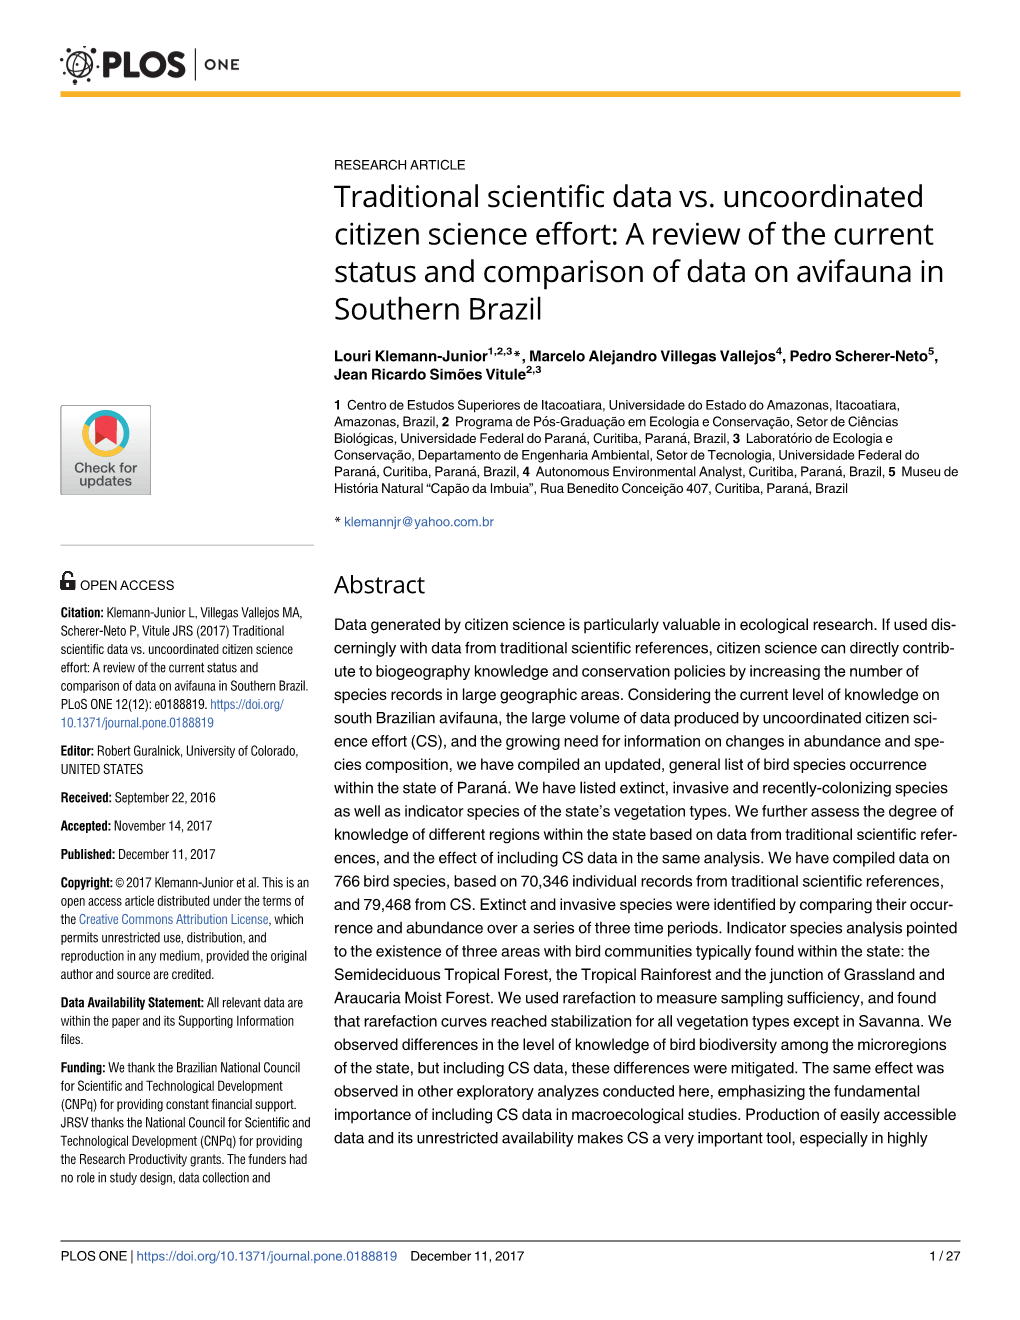 Traditional Scientific Data Vs. Uncoordinated Citizen Science Effort: a Review of the Current Status and Comparison of Data on Avifauna in Southern Brazil